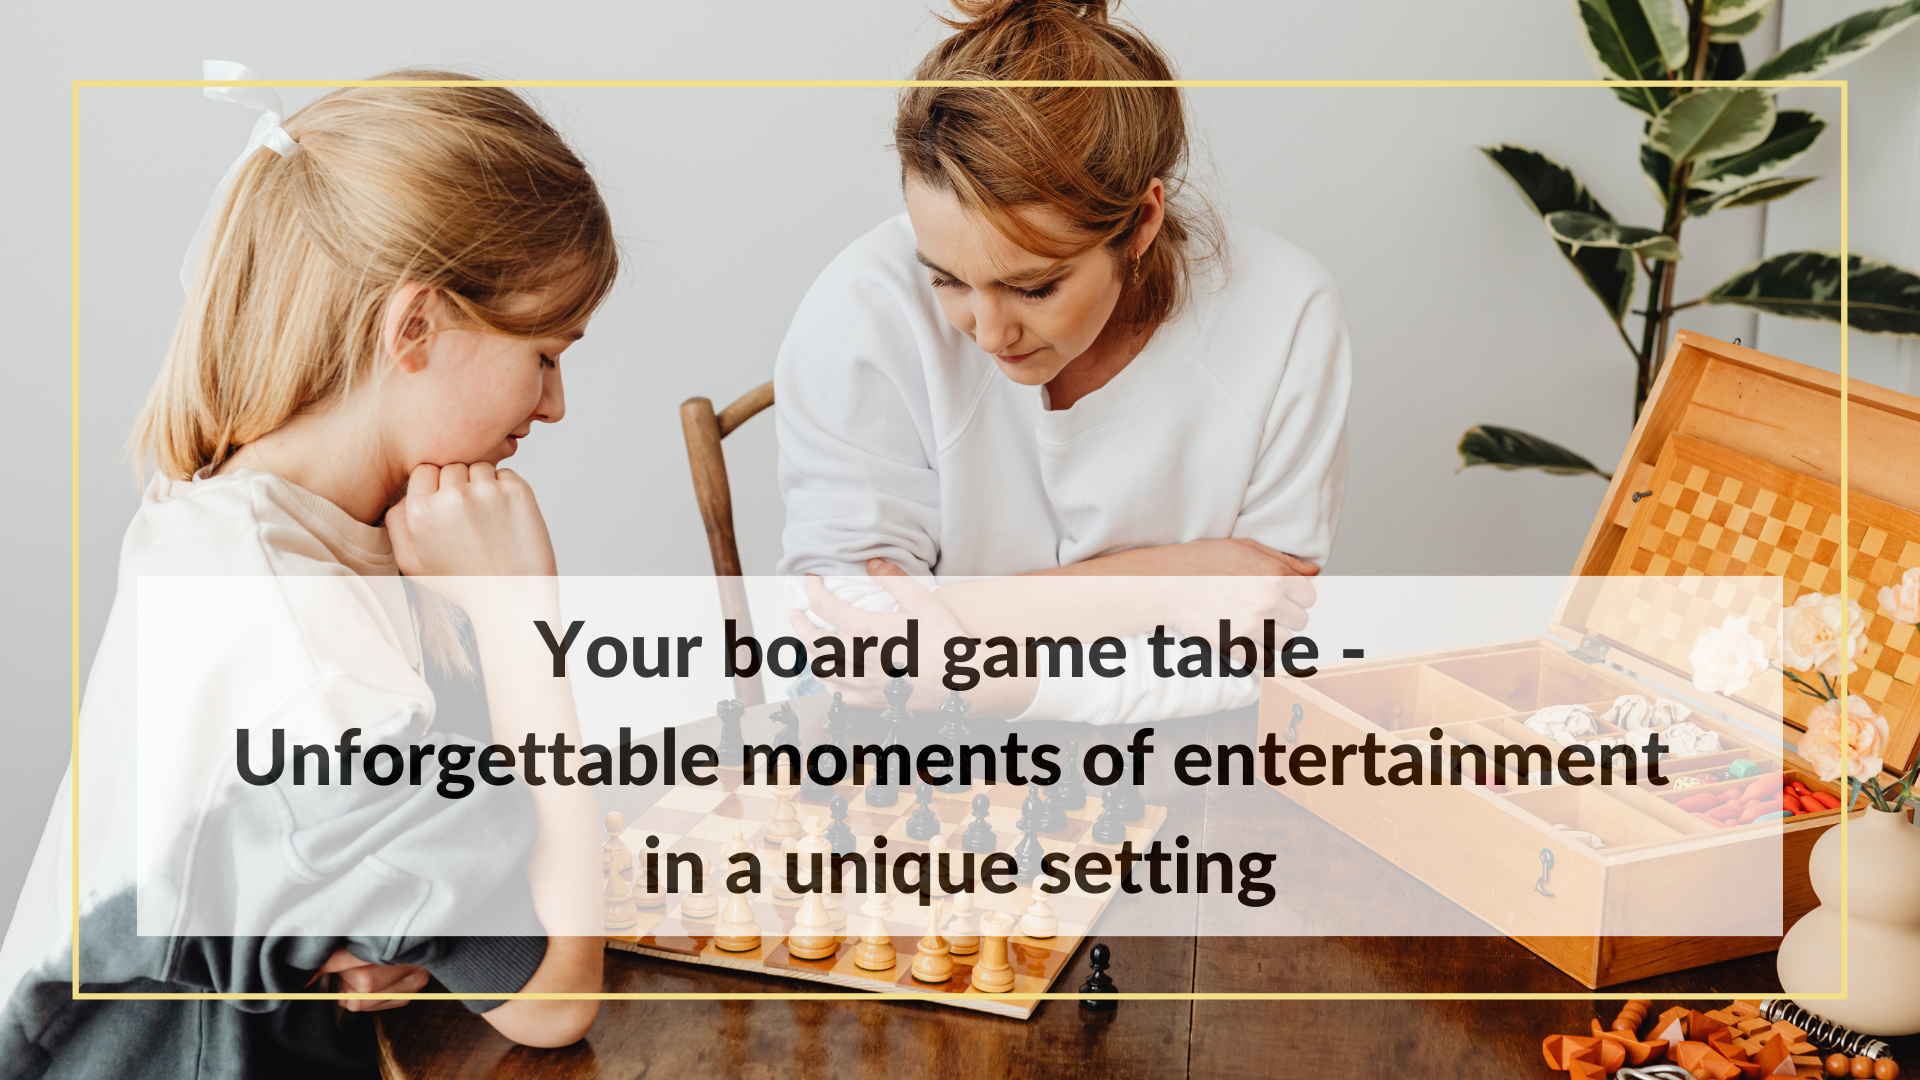 Your board game table - Unforgettable moments of entertainment in a unique setting